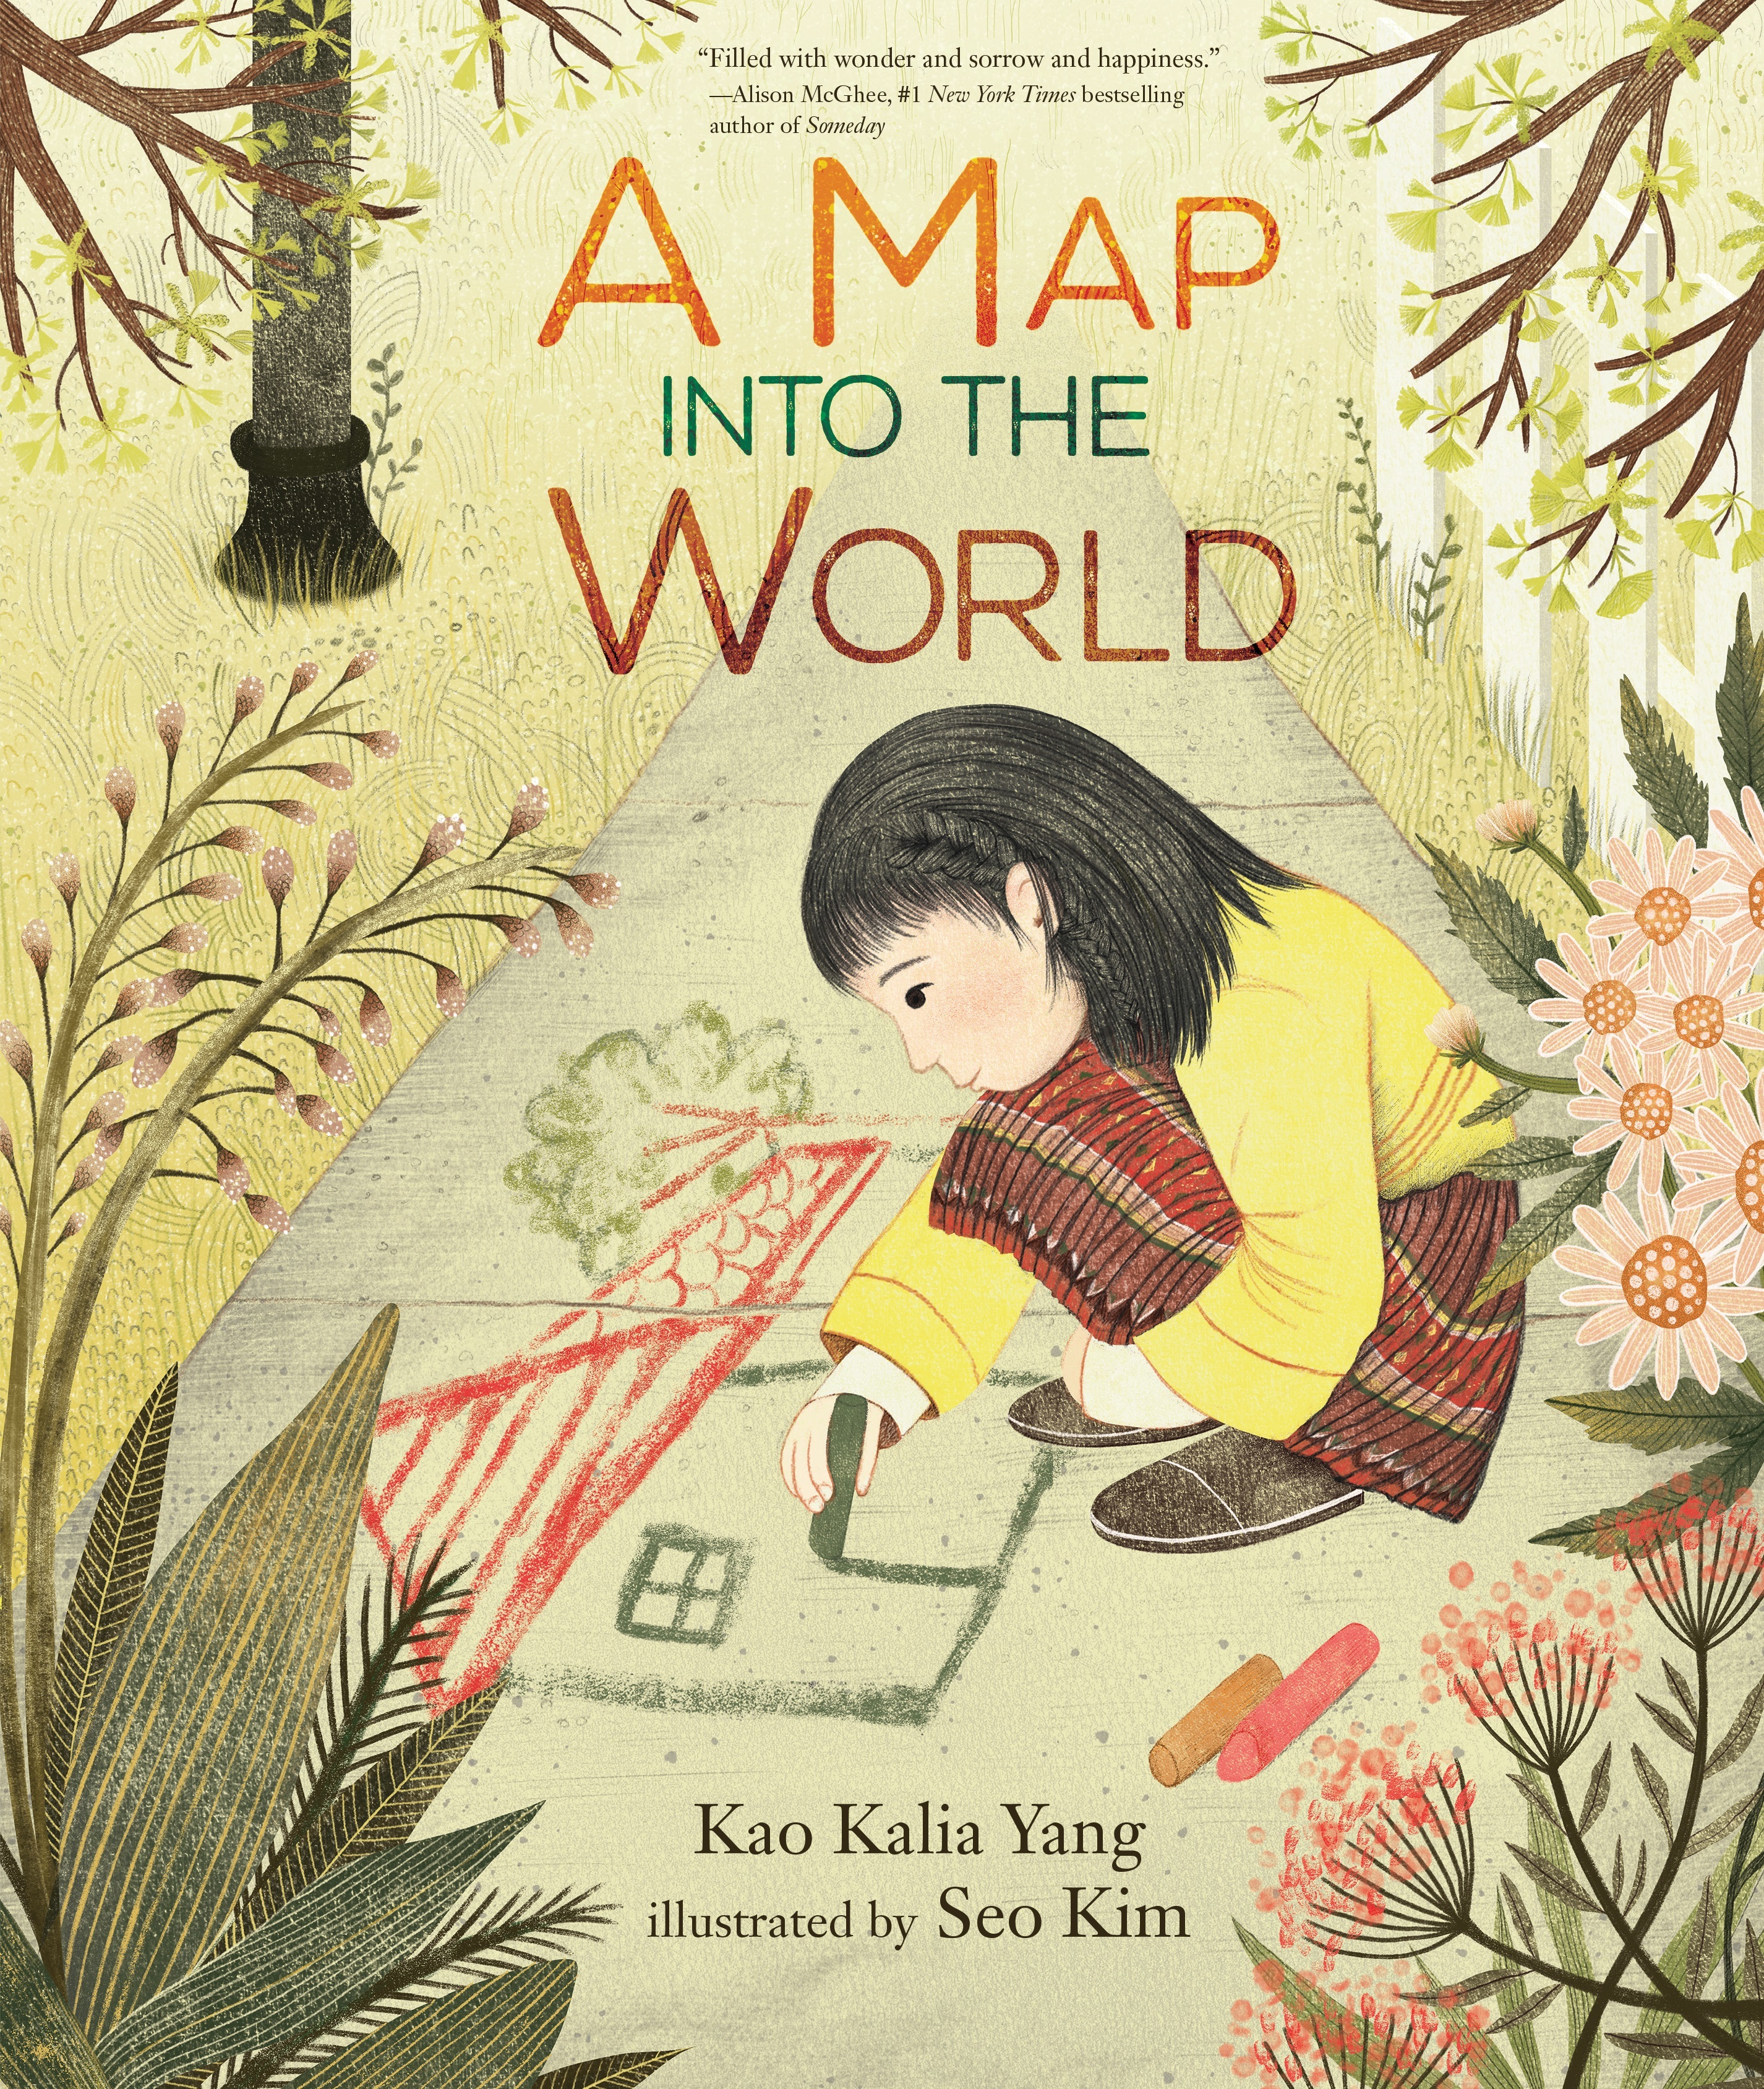 A Map into the World by Kao Kalia Yang, illustrated by Seo Kim. ©2019 Carolrhoda Books, an imprint of Lerner Publishing Group